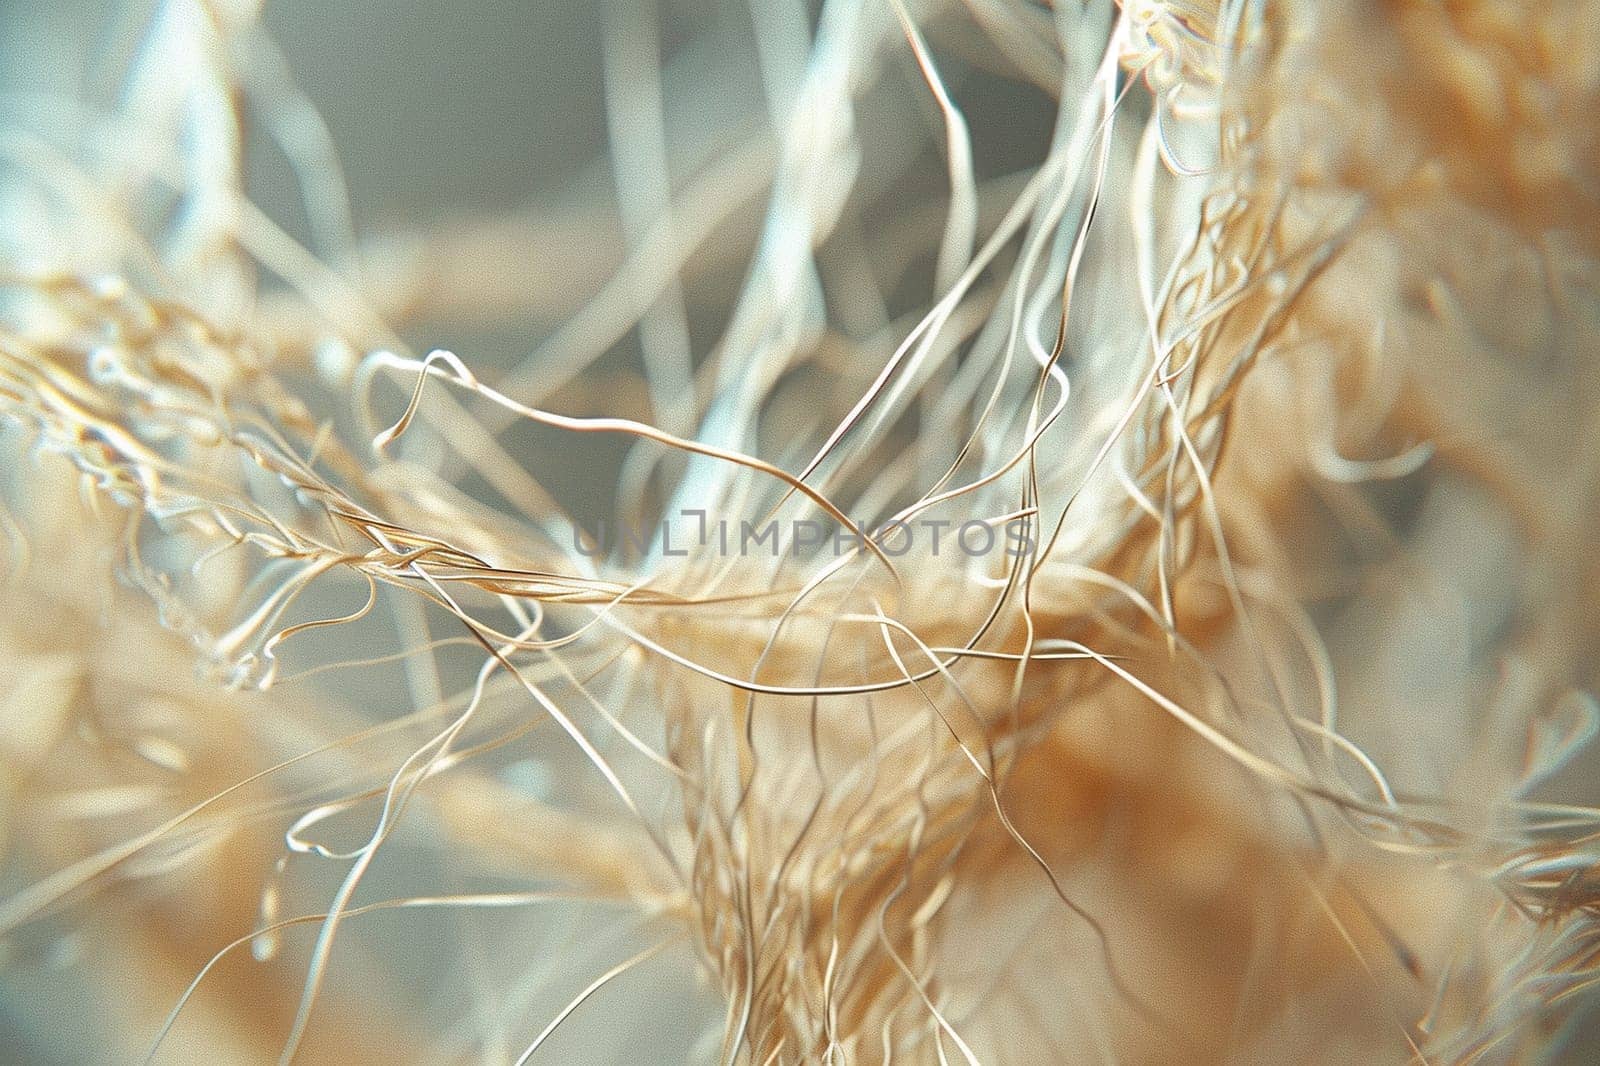 Macro image of a linen rope under a microscope. Horizontal macro background.